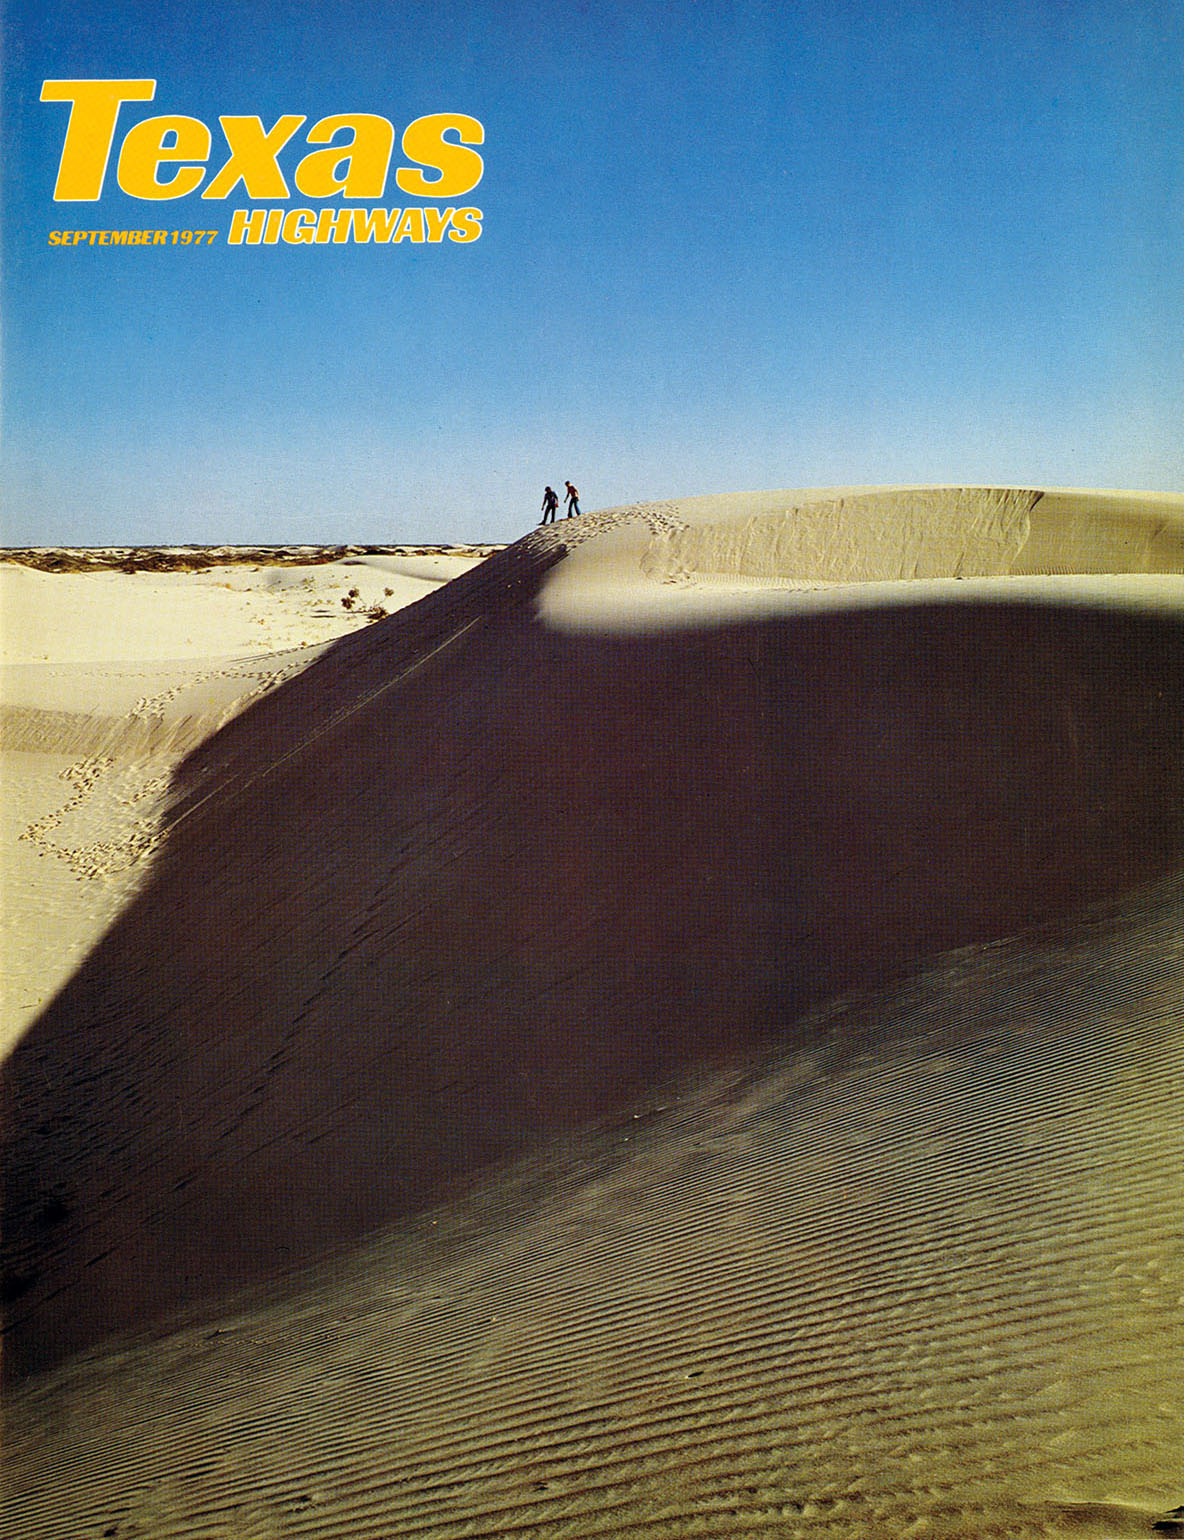 A cover of Texas Highways with a blue background and large sand dune on the cover